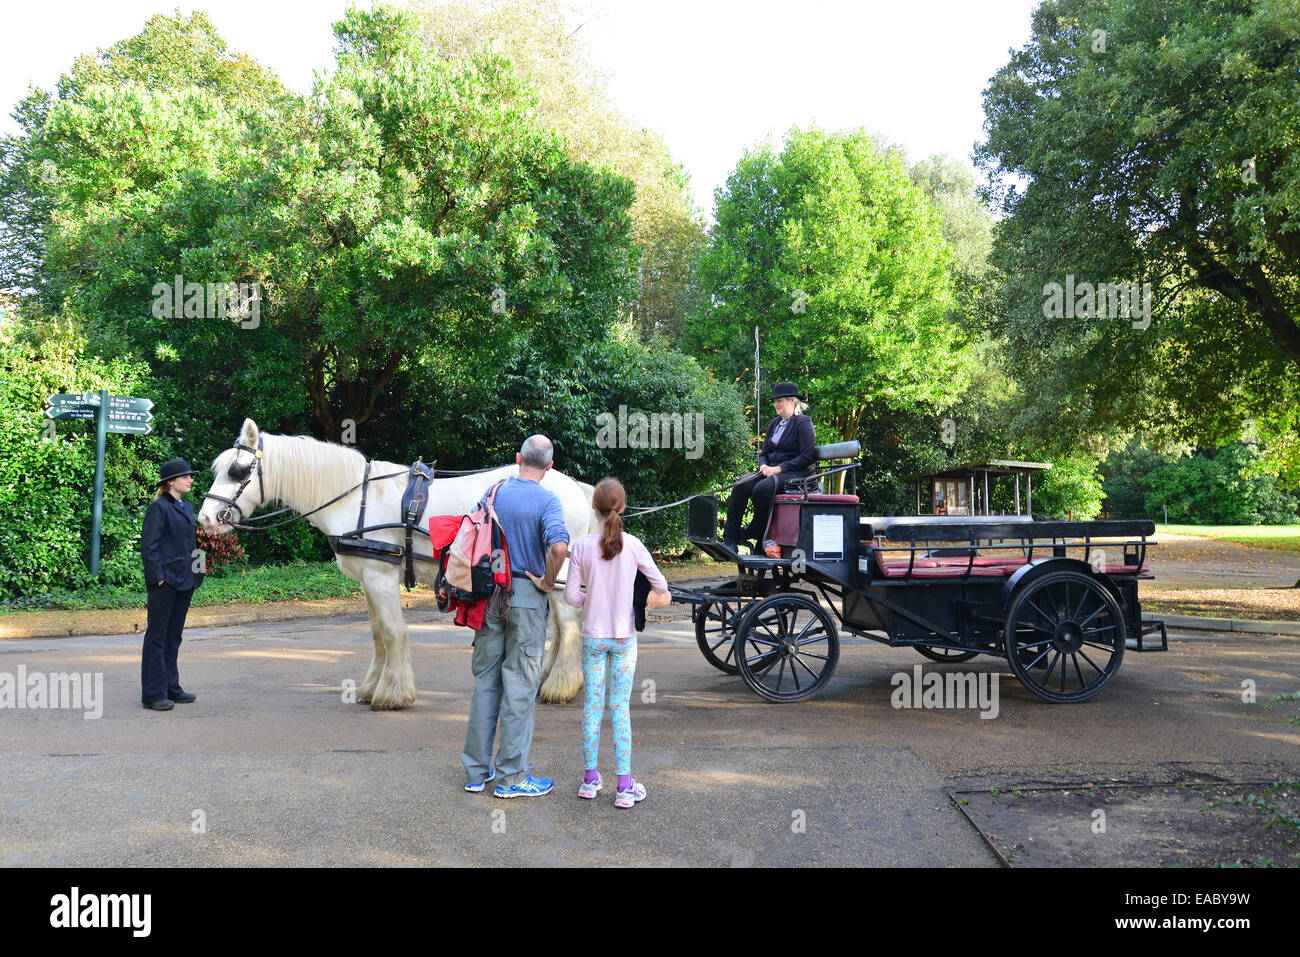 Horse carriage at entrance to Osborne House, East Cowes, Isle of Wight, England, United Kingdom Stock Photo